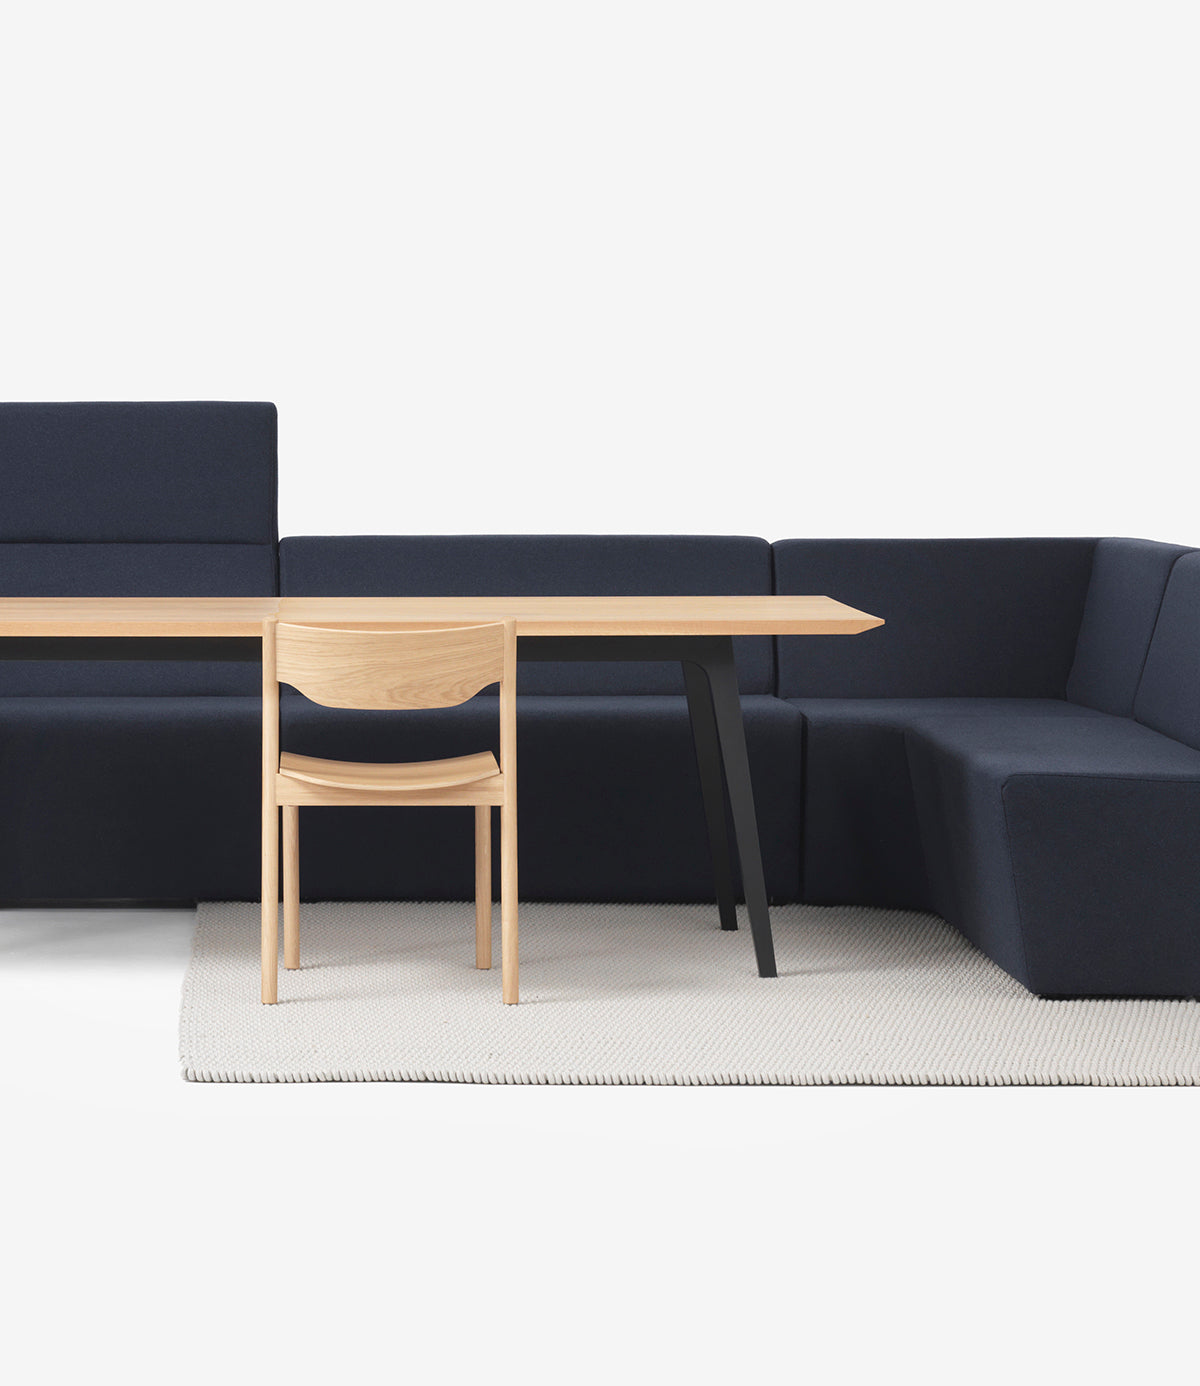 <p>Modular Furniture for the Office</p>